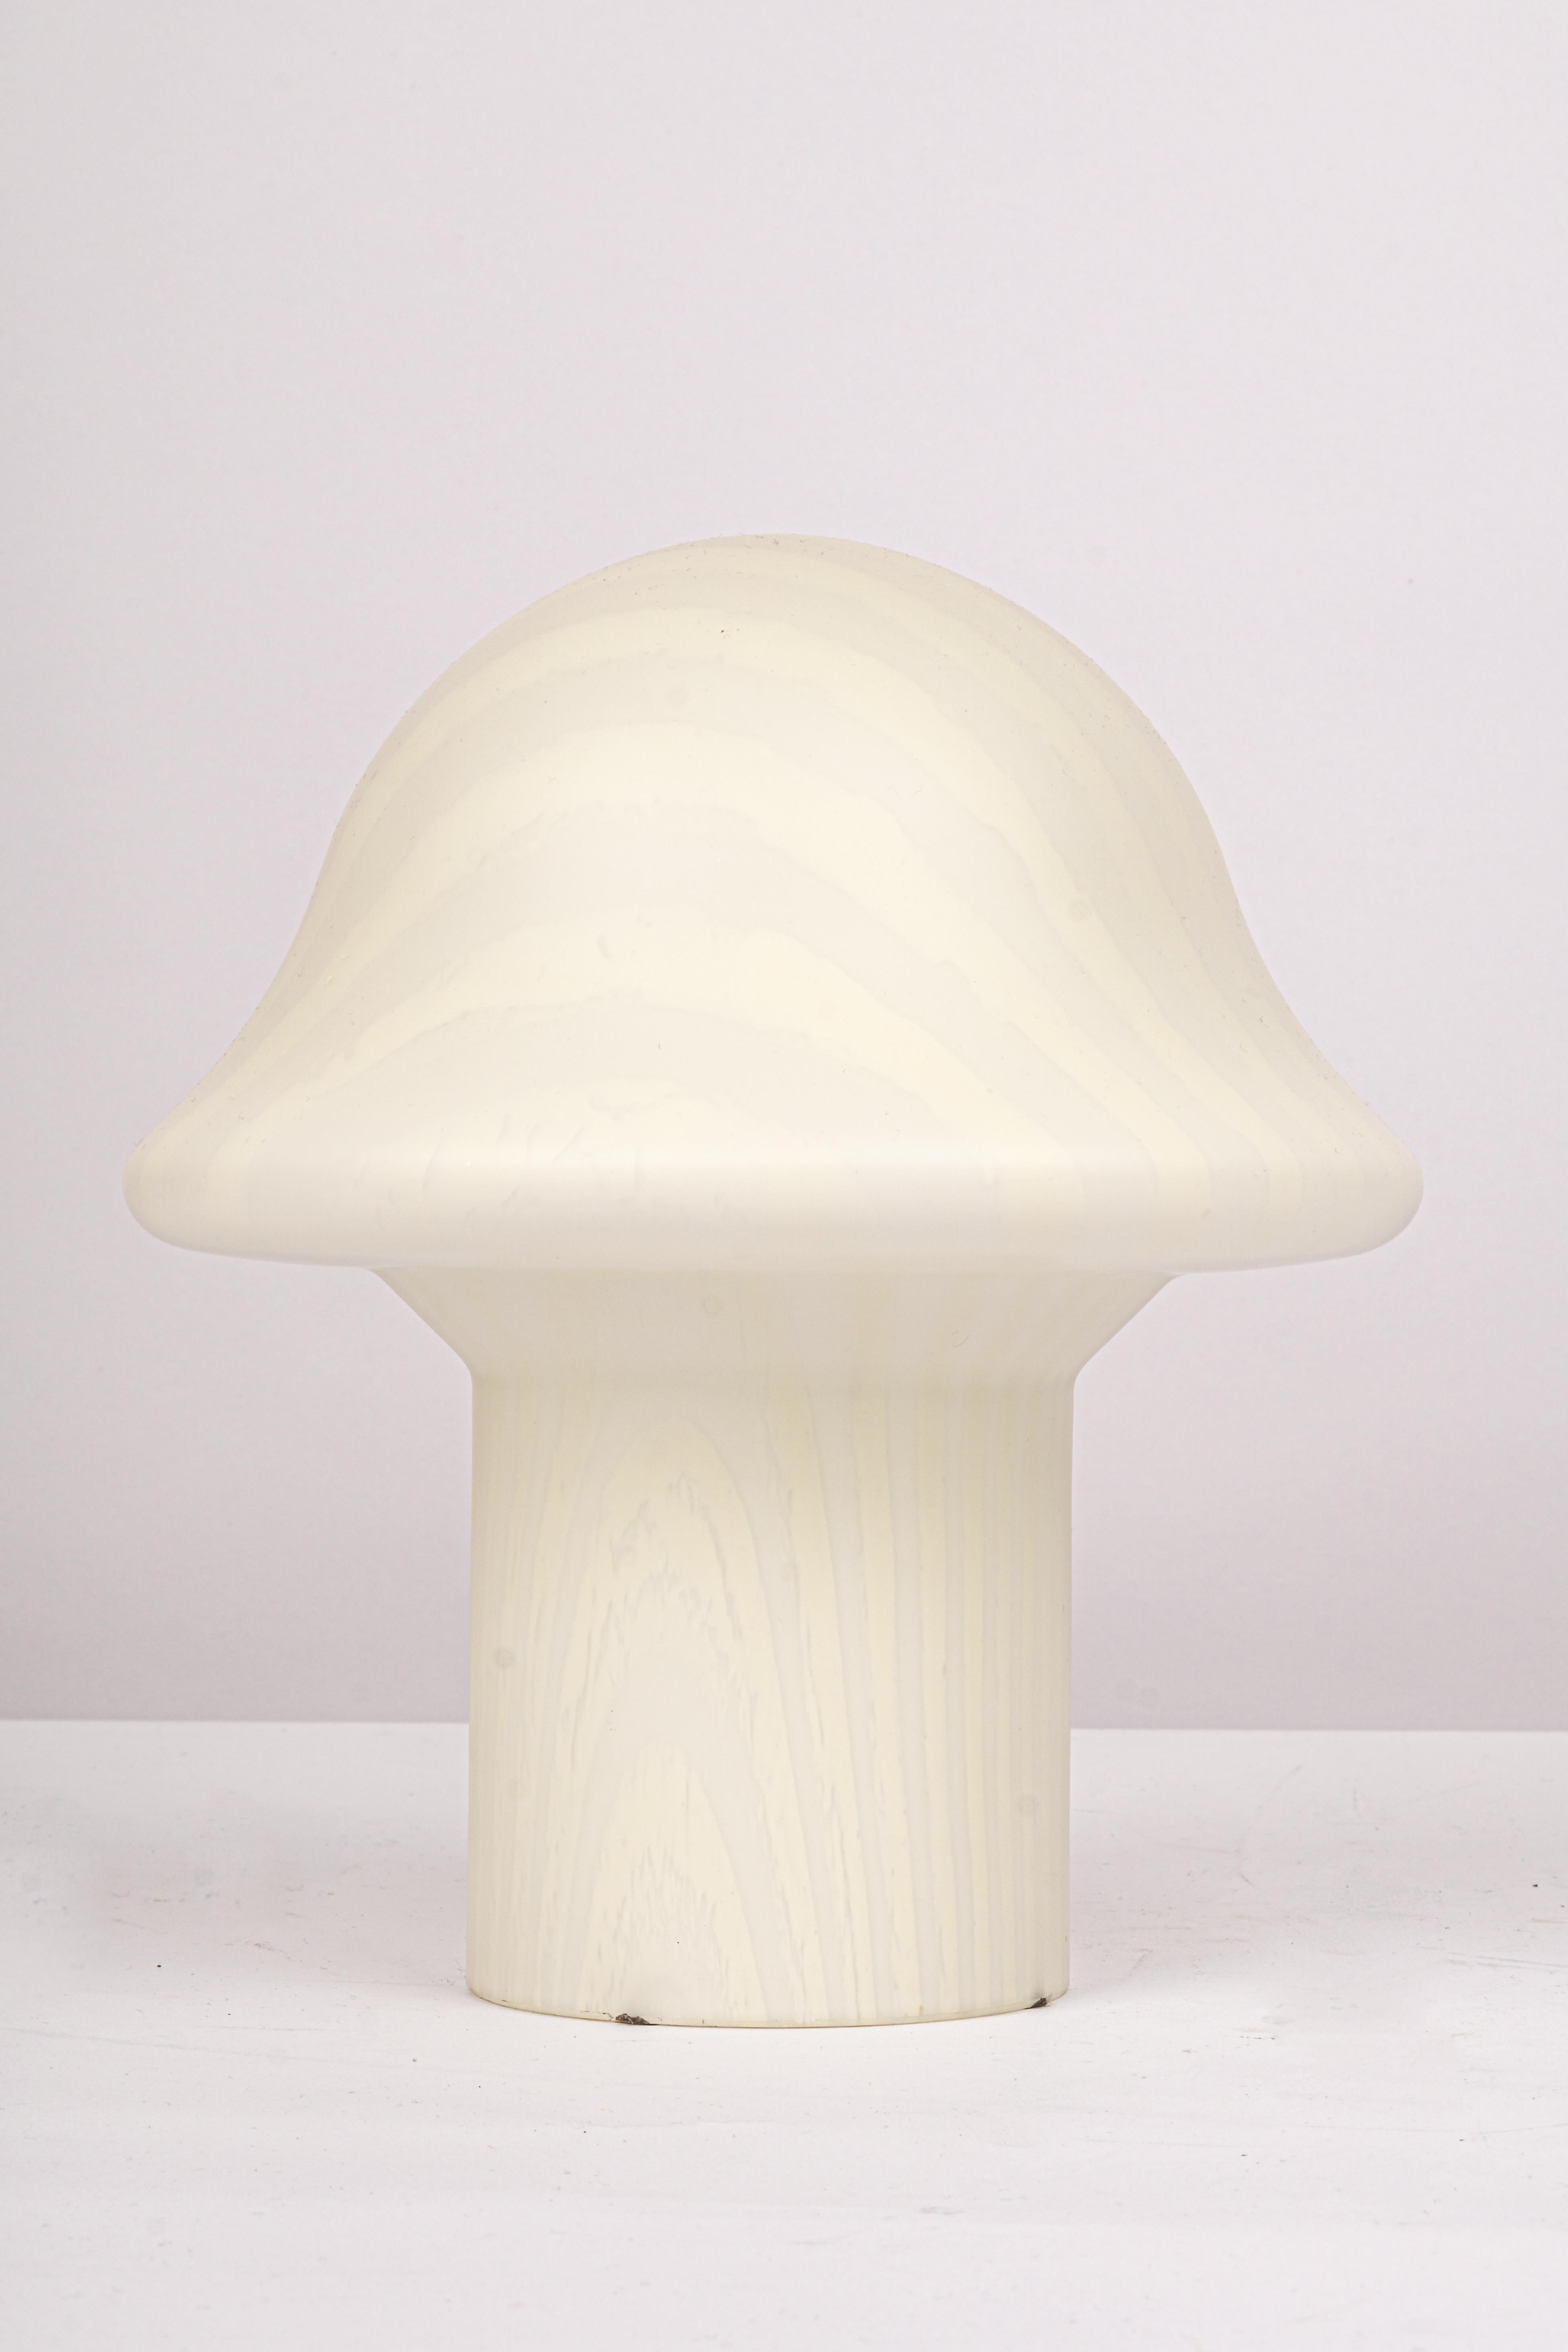 Wonderful pair of midcentury mushroom table lamps by Peill & Putzler, Germany, 1970s.
Made of a single piece of blown and cased glass.
Manufacturer: Peill & Putzler

Stunning glass form and in very good condition. Cleaned, well-wired, and ready